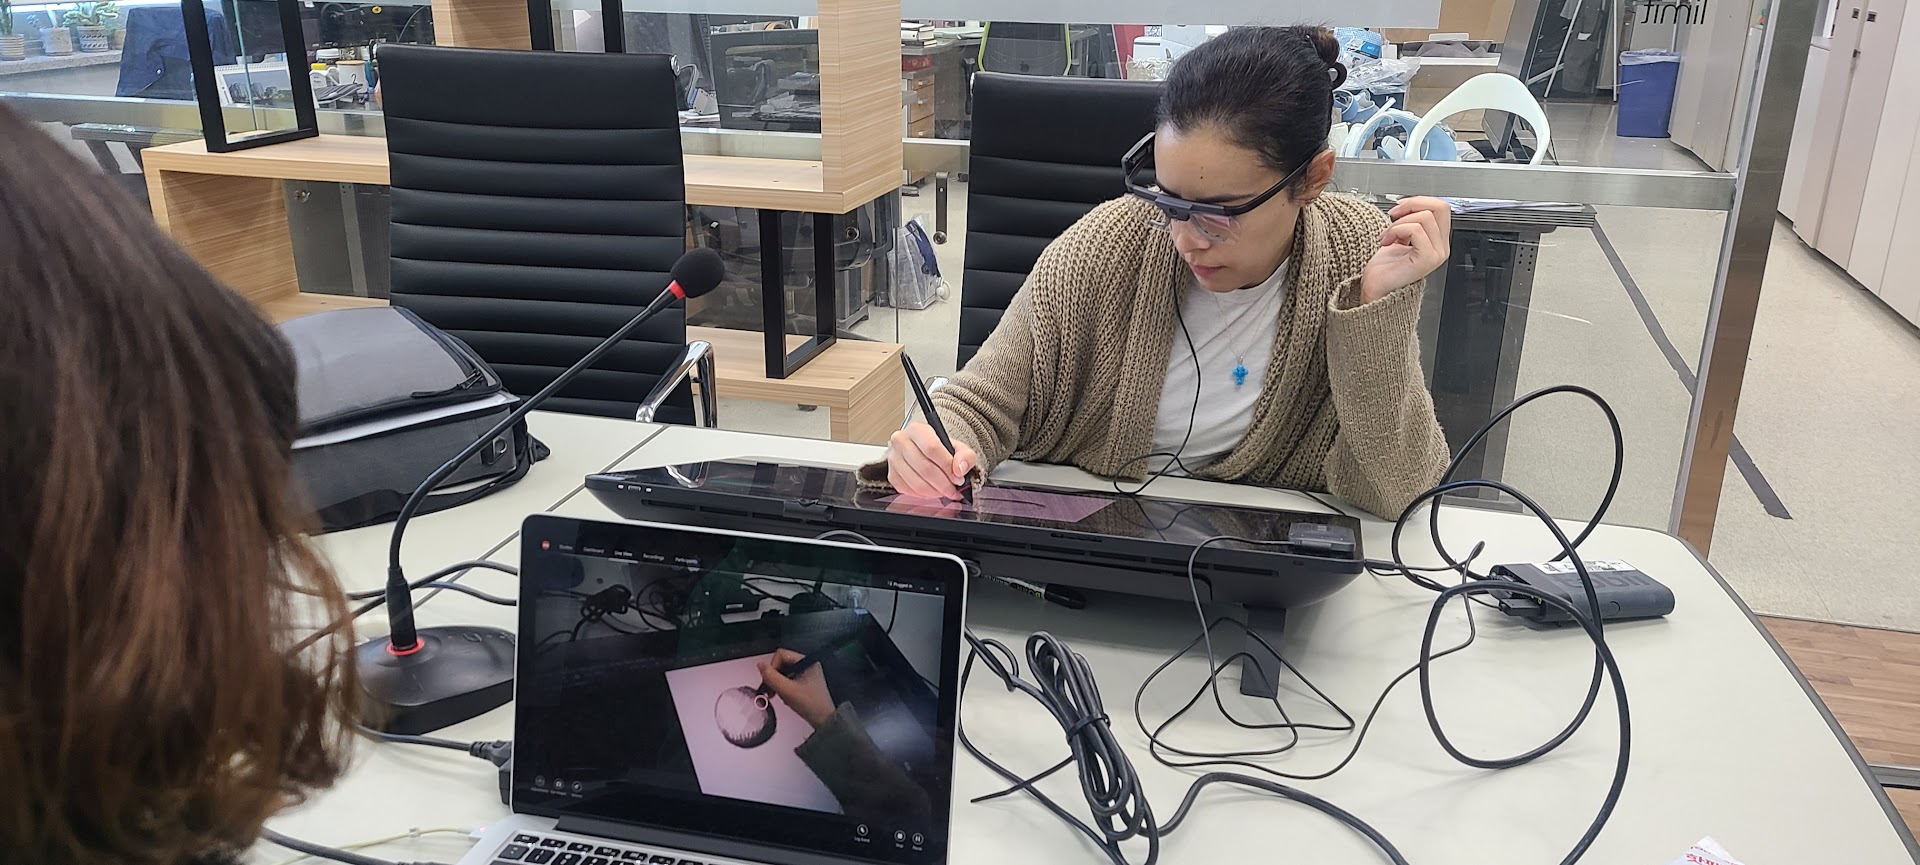 Eye-tracking study to examine the role and use of sketching during conceptual design as an external aid to design thinking